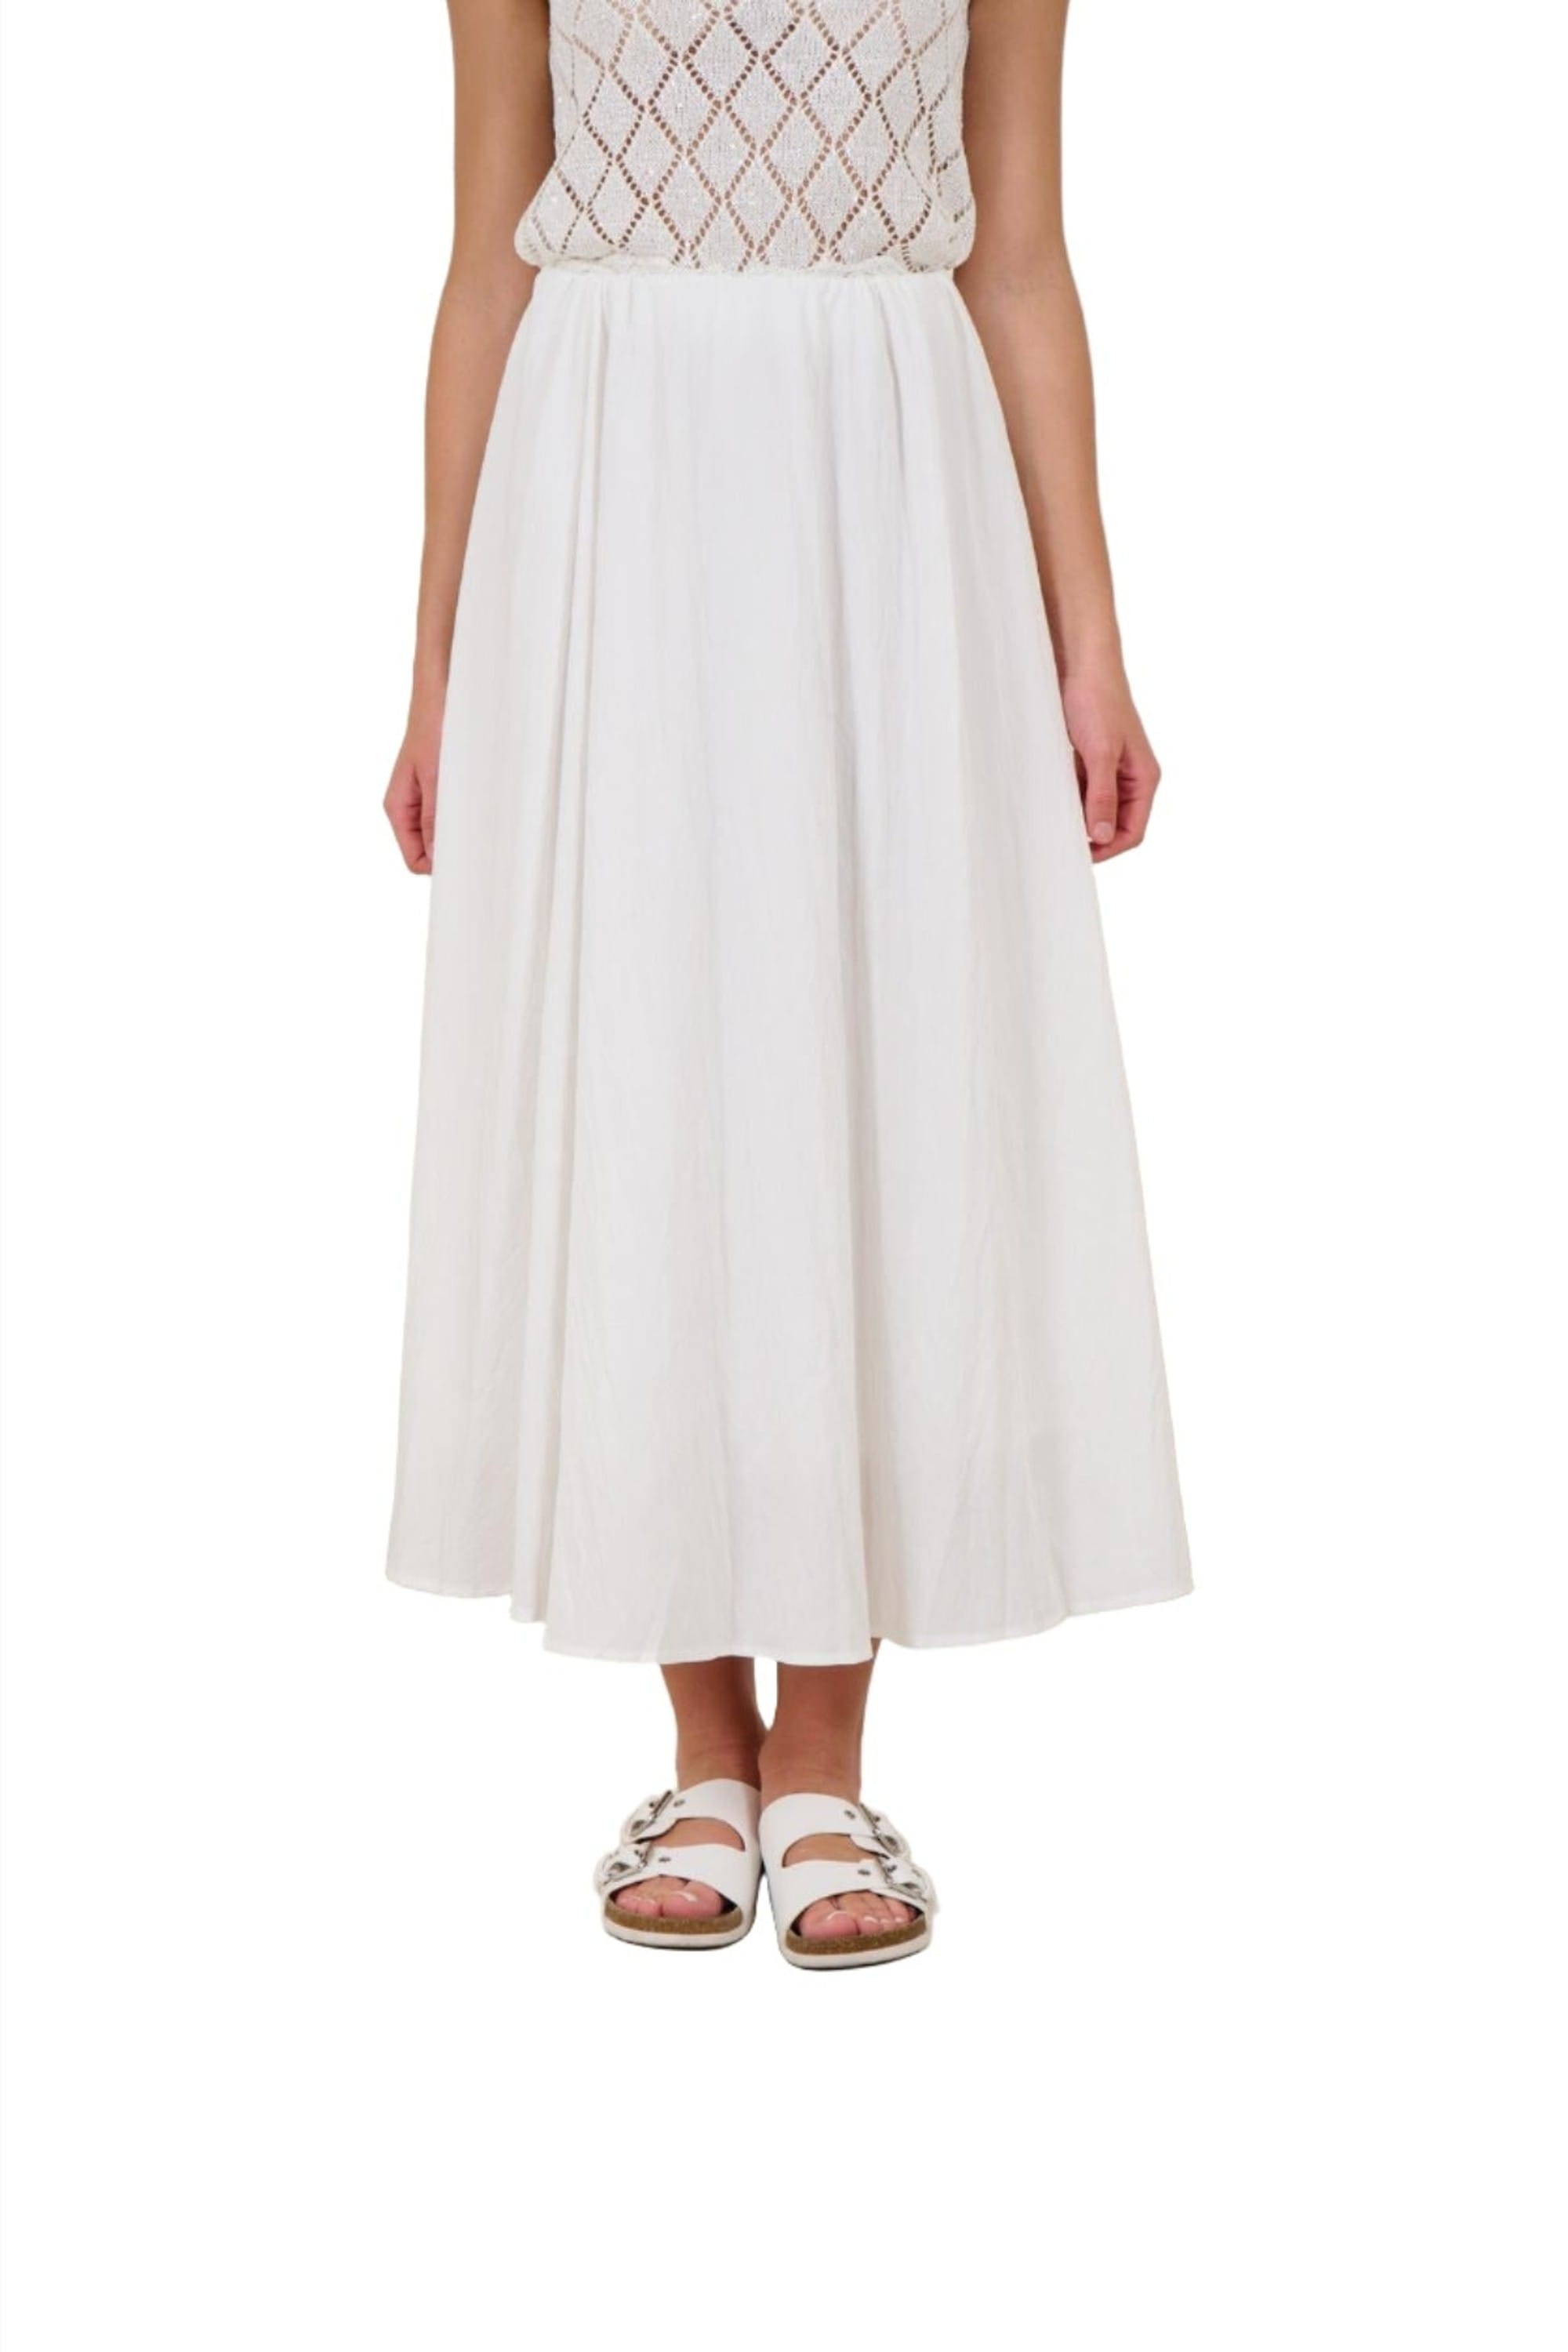 Clever Alice Isabel Skirt in White - clever alice